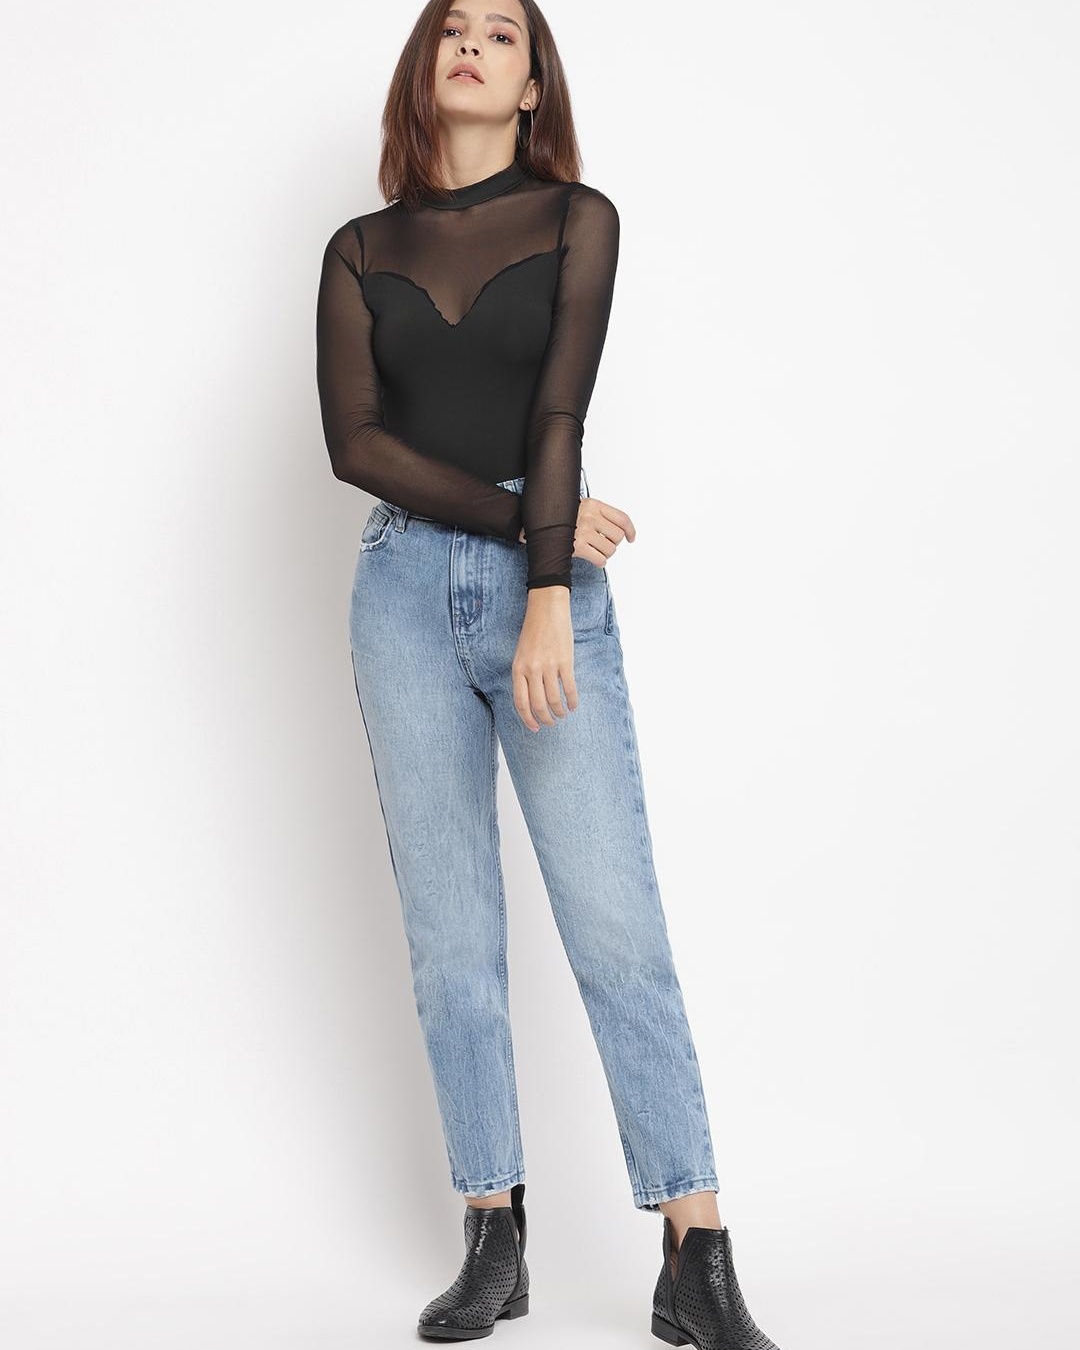 boyfriend jeans with casual corset top